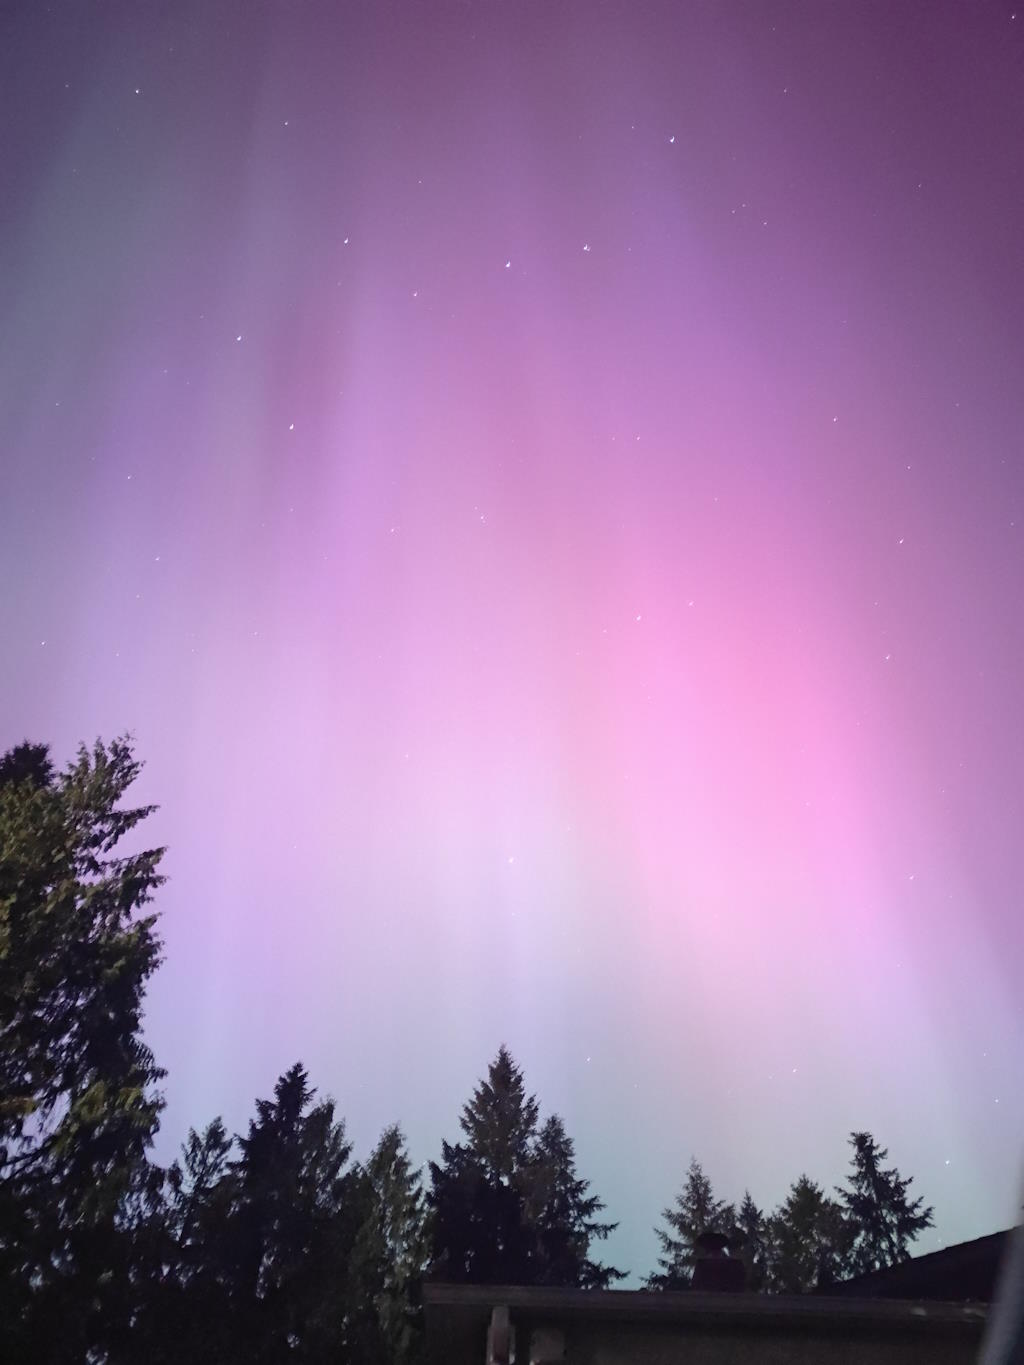 A vivid display of pink and purple aurora borealis, reminiscent of the Hubble's celestial images, visible above silhouetted trees against a night sky.